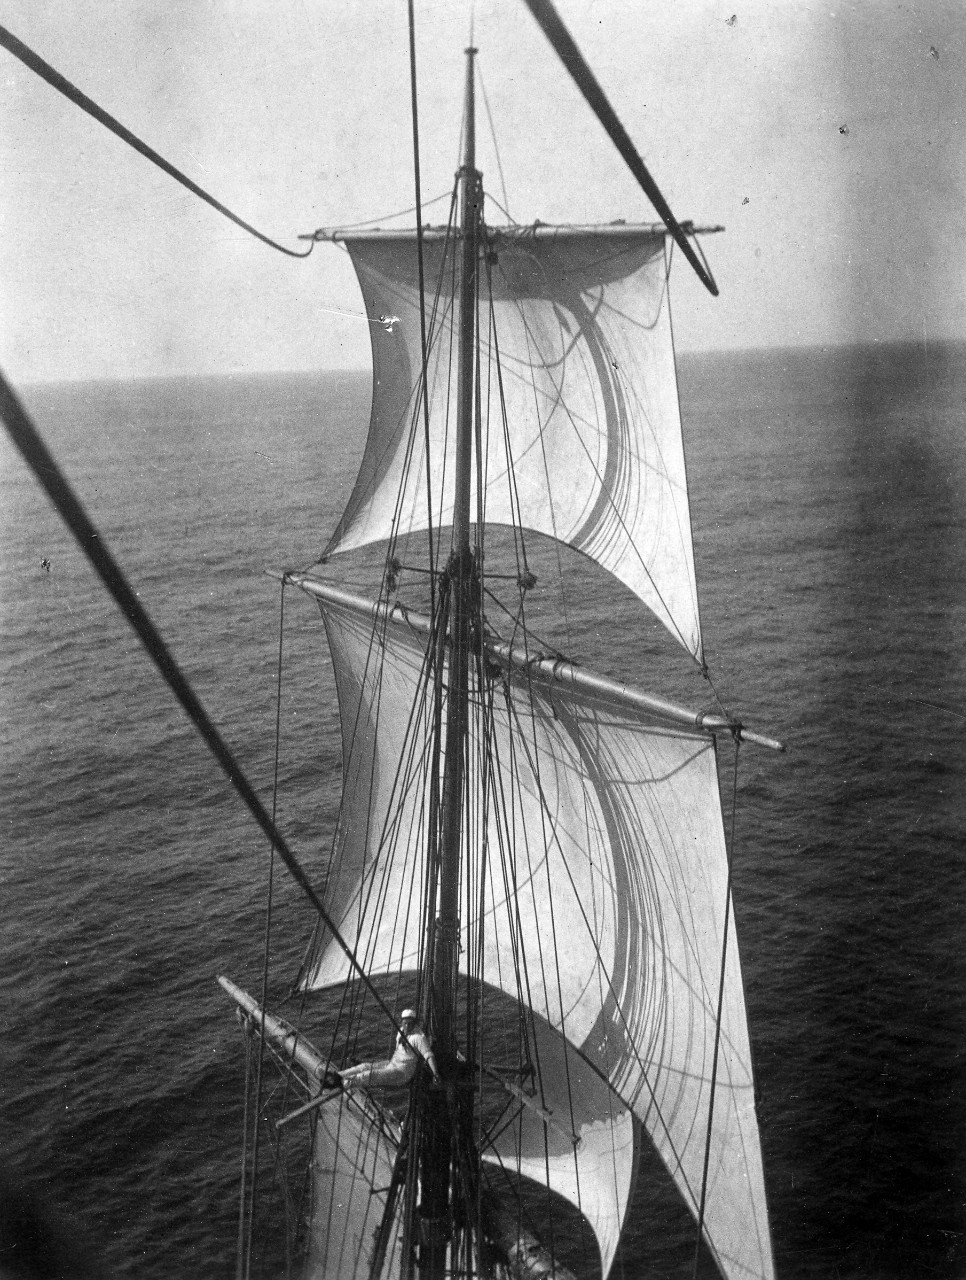 A midshipman sitting in the rigging on the training vessel USS Chesapeake, 1902. He is a member of Naval Academy class of 1905. Image is from the Clarence Grace Collection.